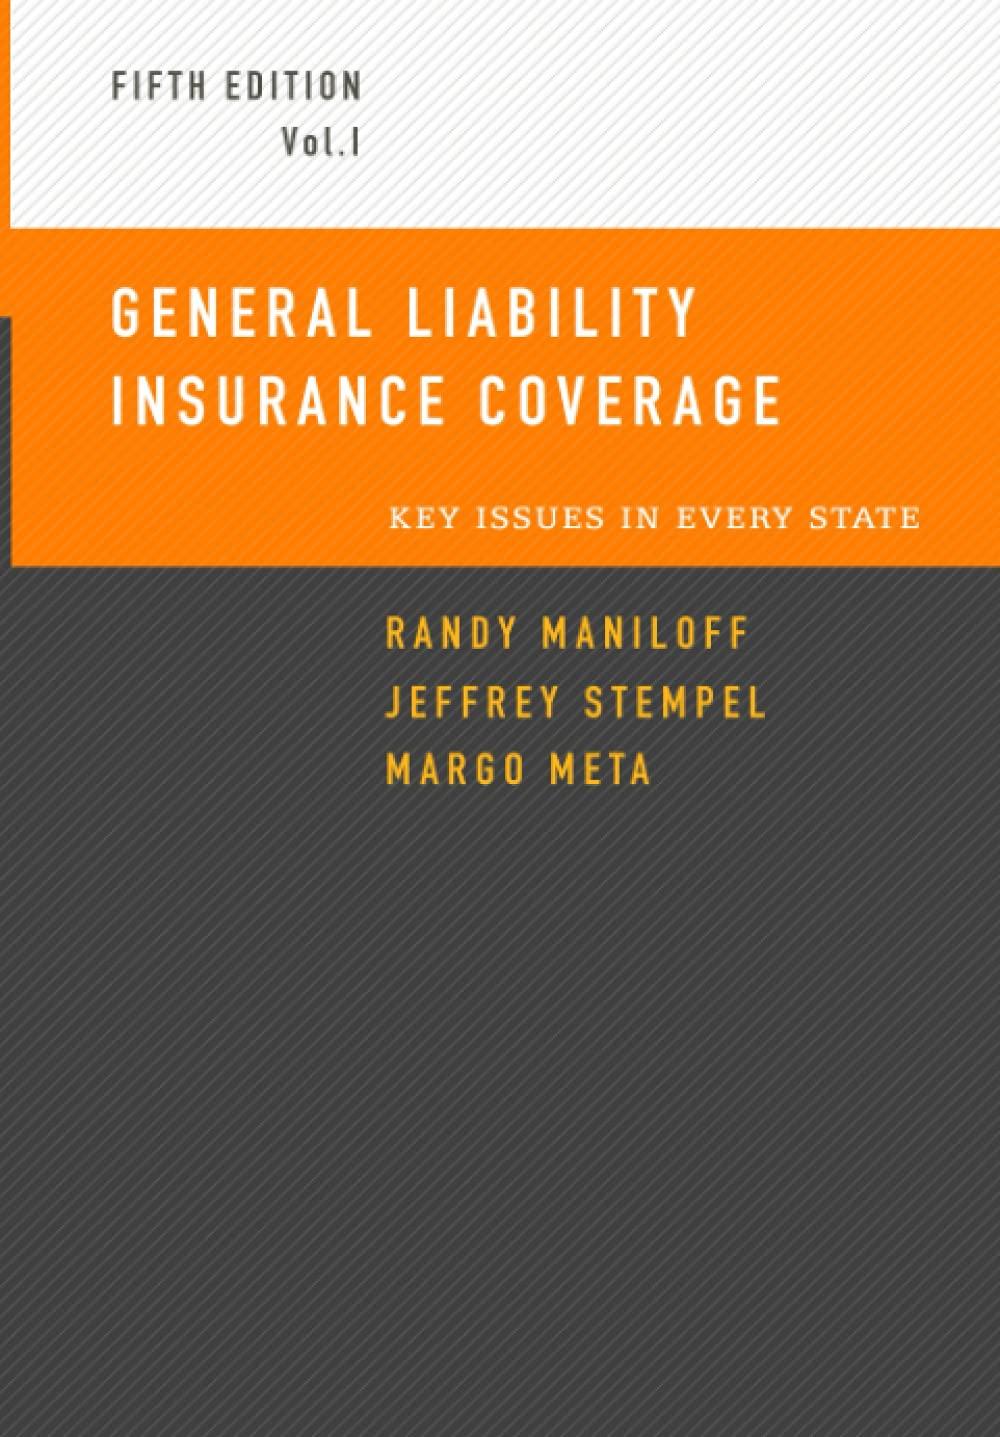 general liability insurance coverage key issues in every state volume i 5th edition randy maniloff, jeffrey